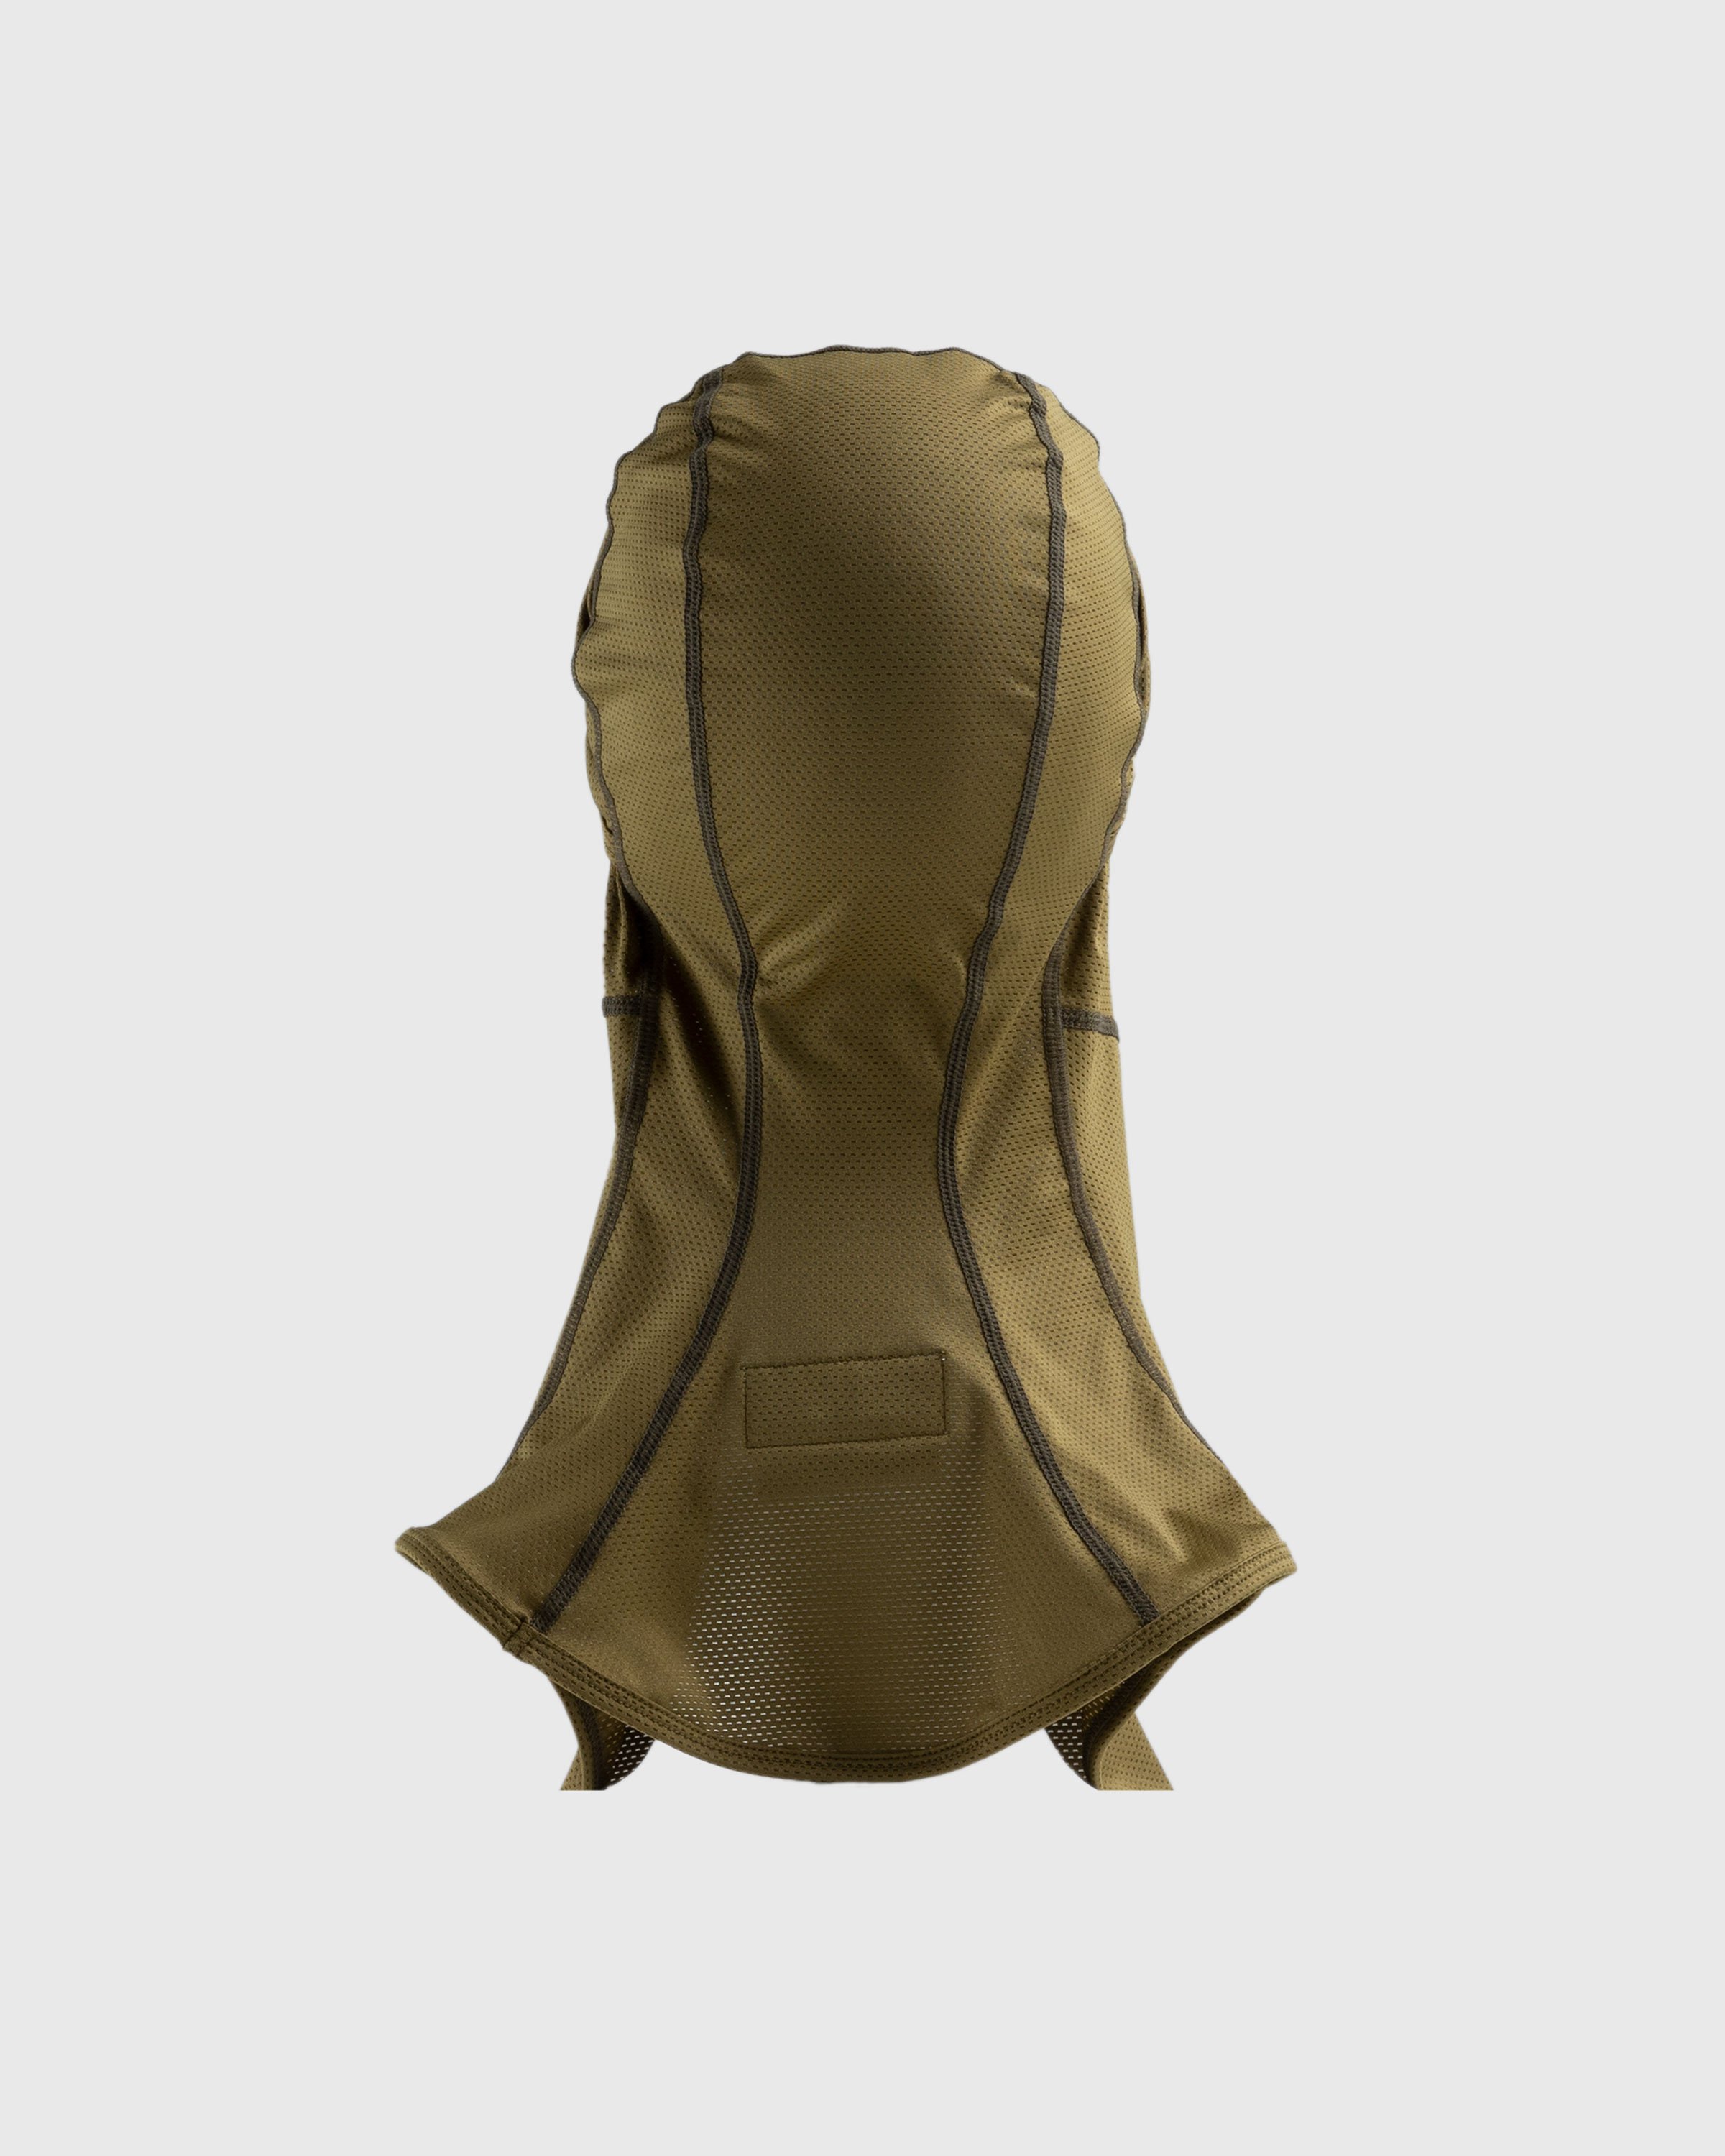 Post Archive Faction (PAF) - 5.0 Balaclava Right Olive Green - Accessories - Green - Image 3